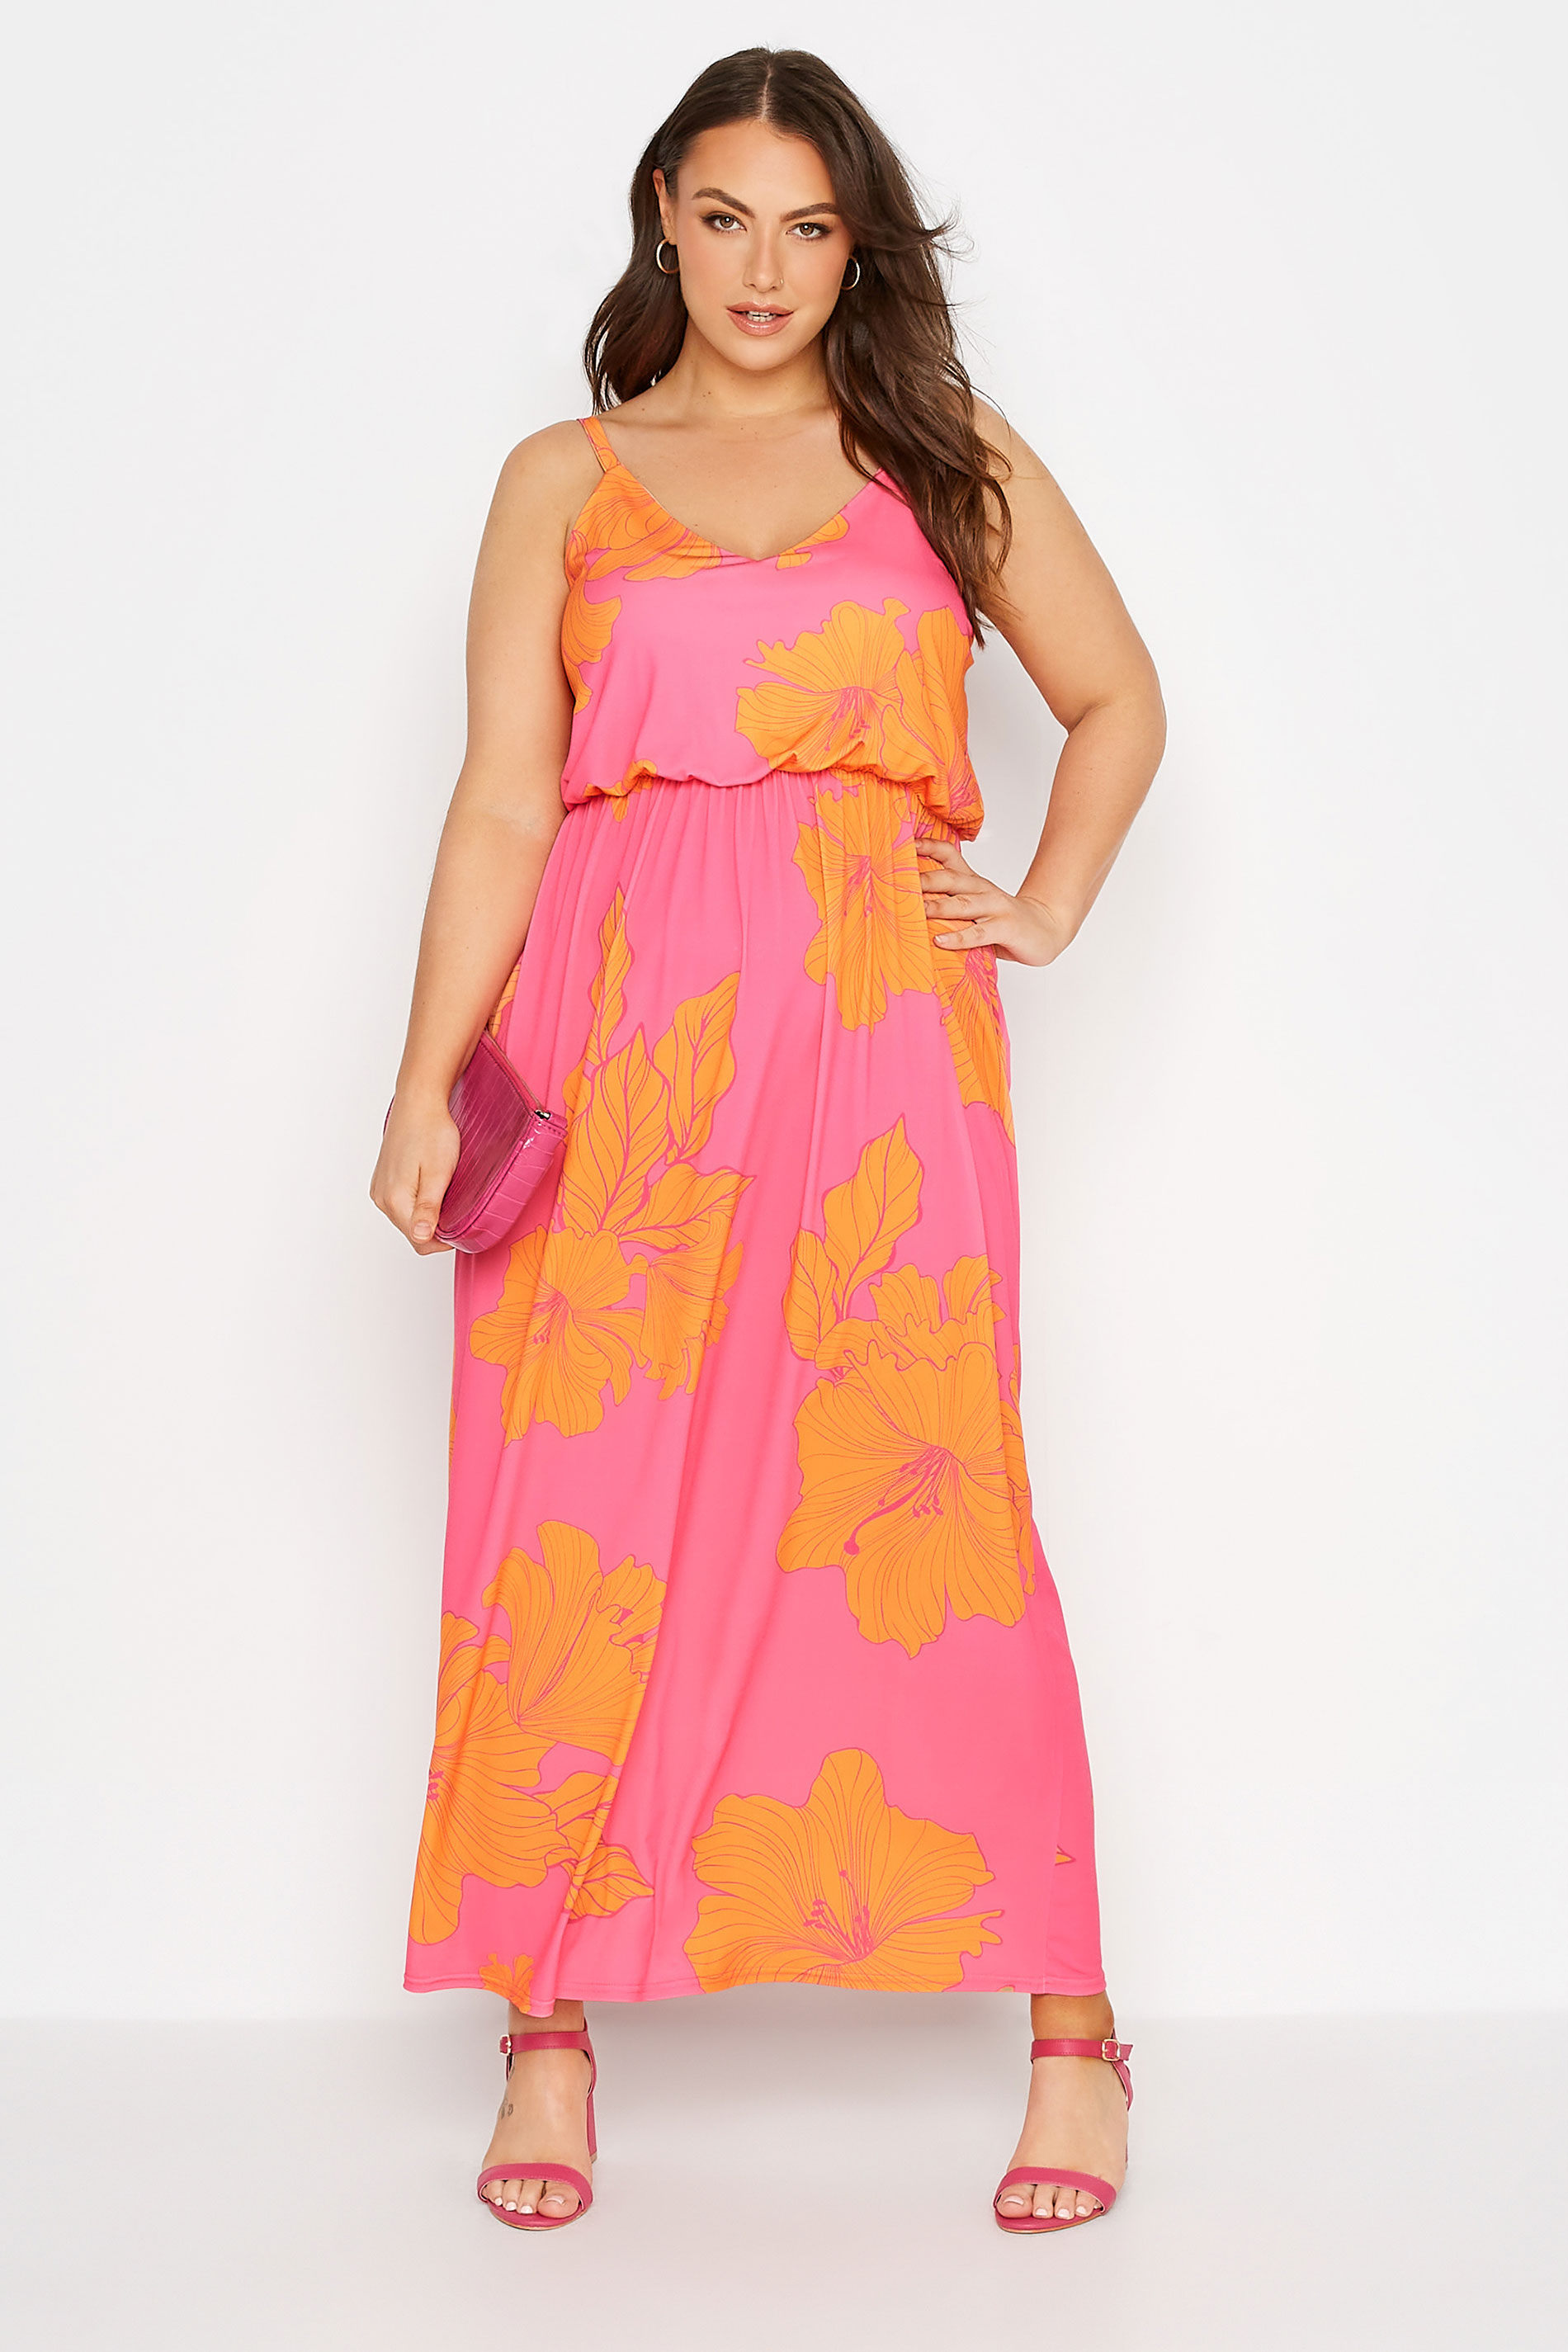 Robes Grande Taille Grande taille  Robes Longues | YOURS LONDON - Robe Rose Imprimé Floral Tropical Orange - MW02818